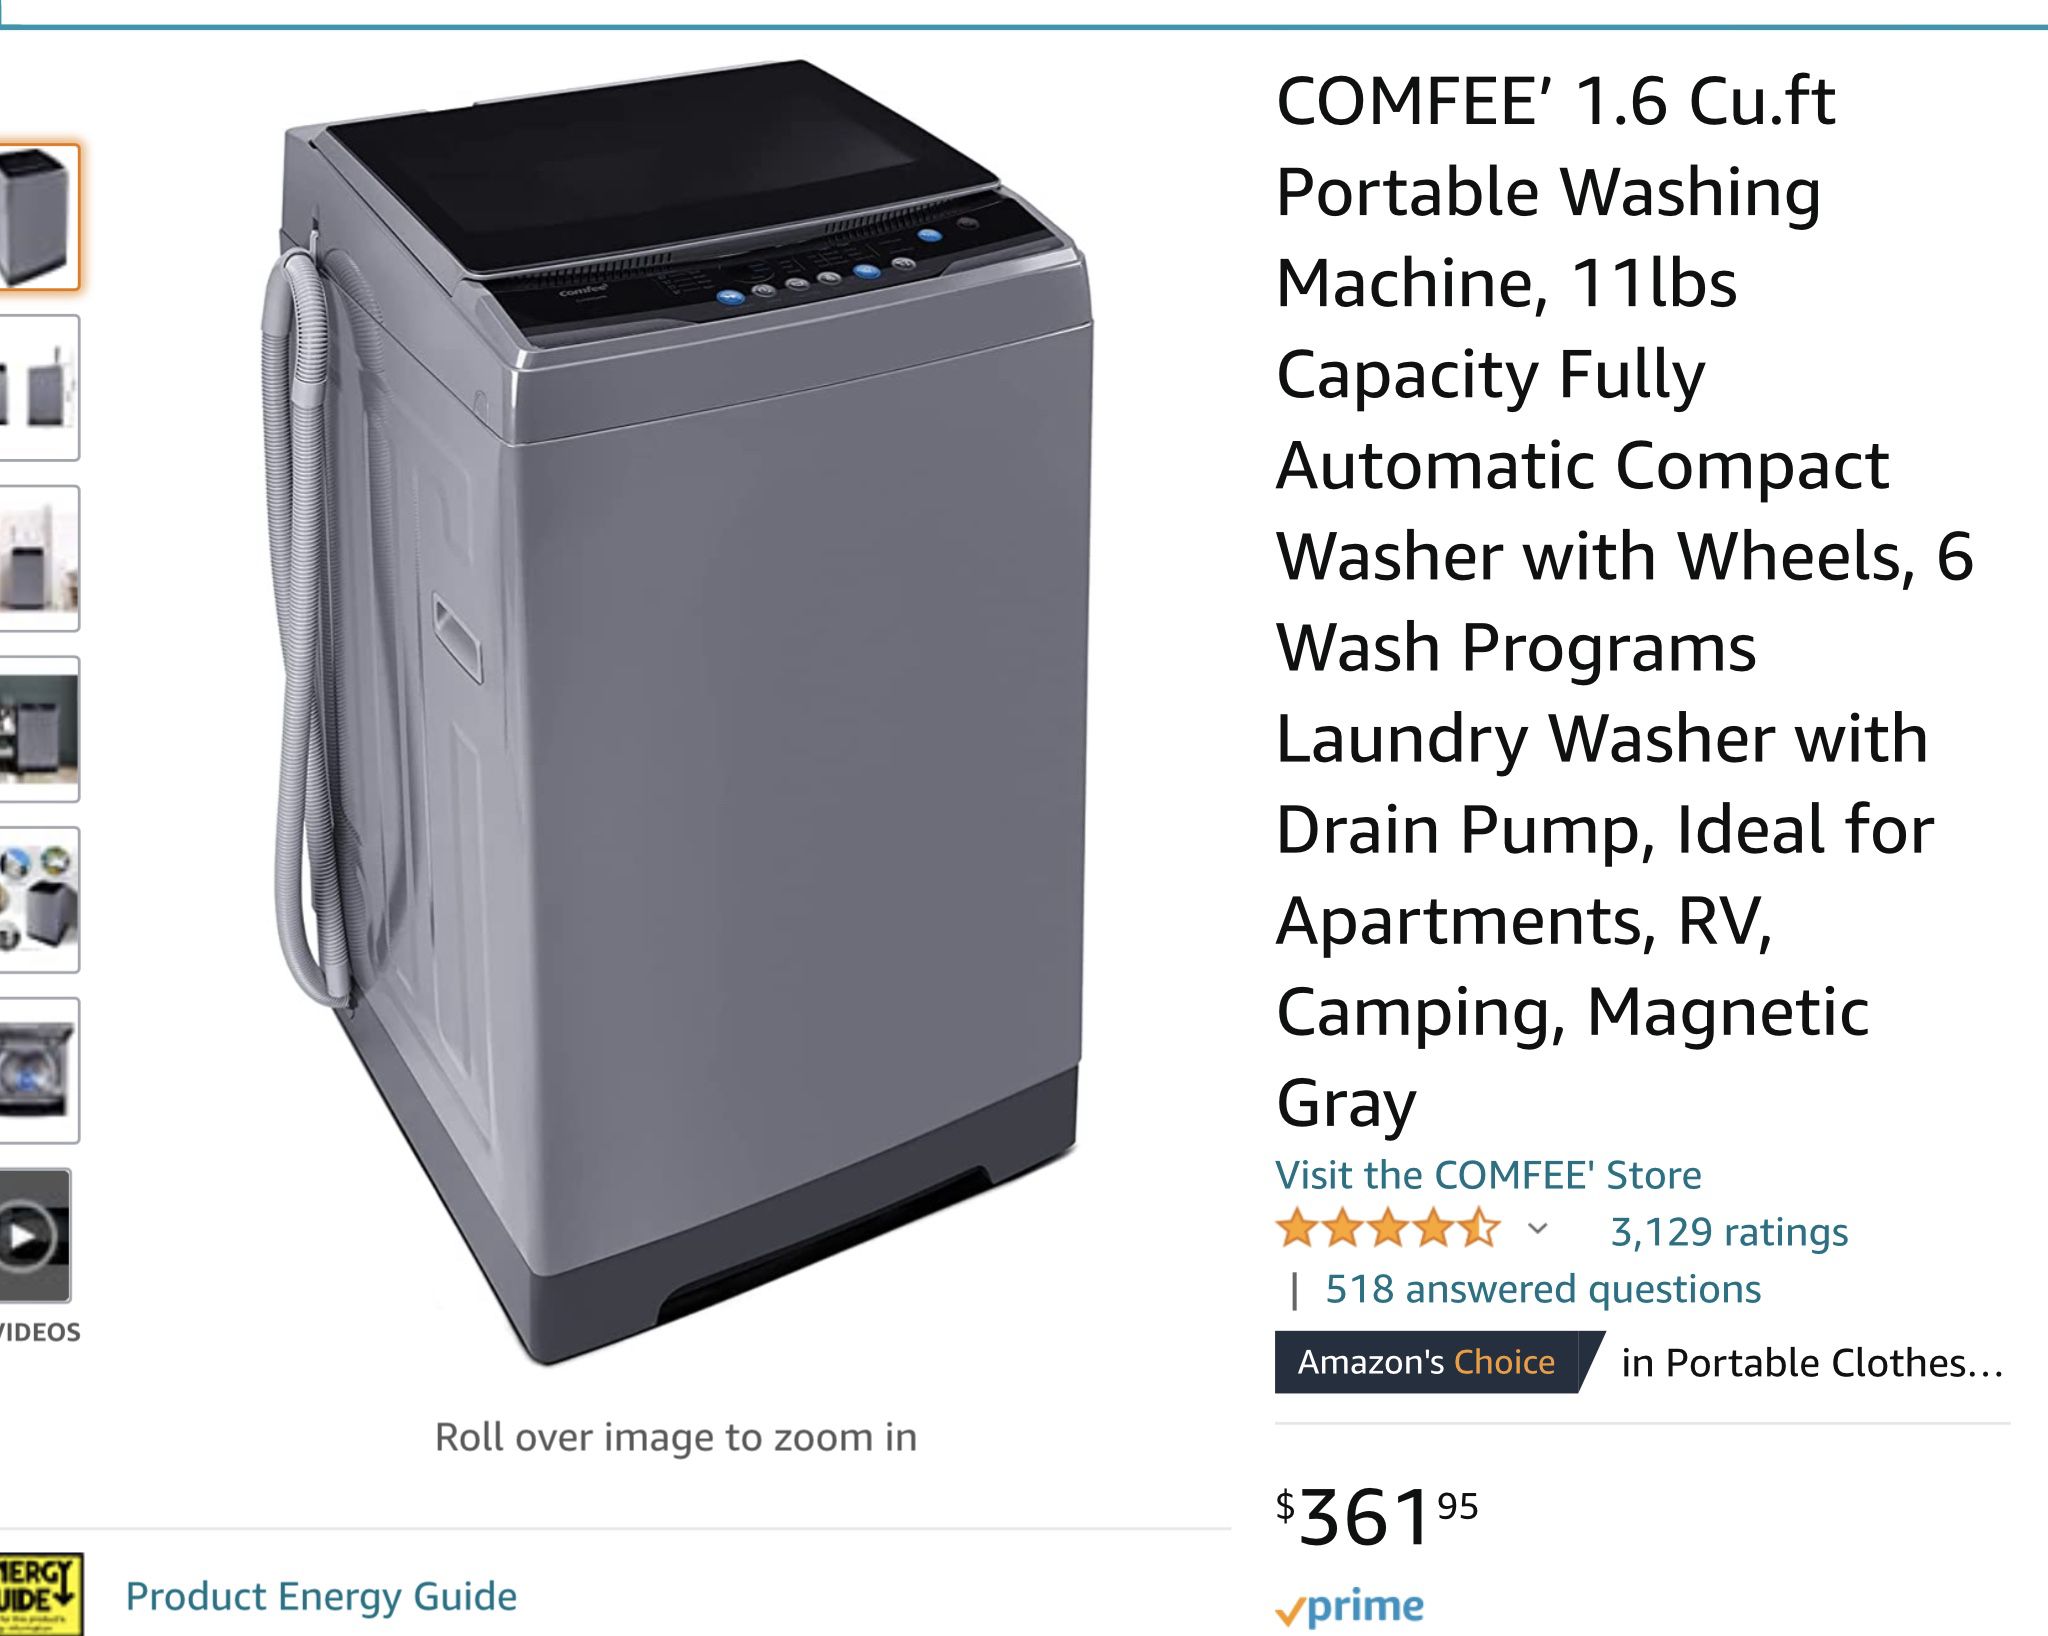 COMFEE' 1.6 Cu.ft Portable Washing Machine, 11lbs Capacity Fully Automatic  Compact Washer with Wheels, 6 Wash Programs Laundry Drain Pump, Ideal for